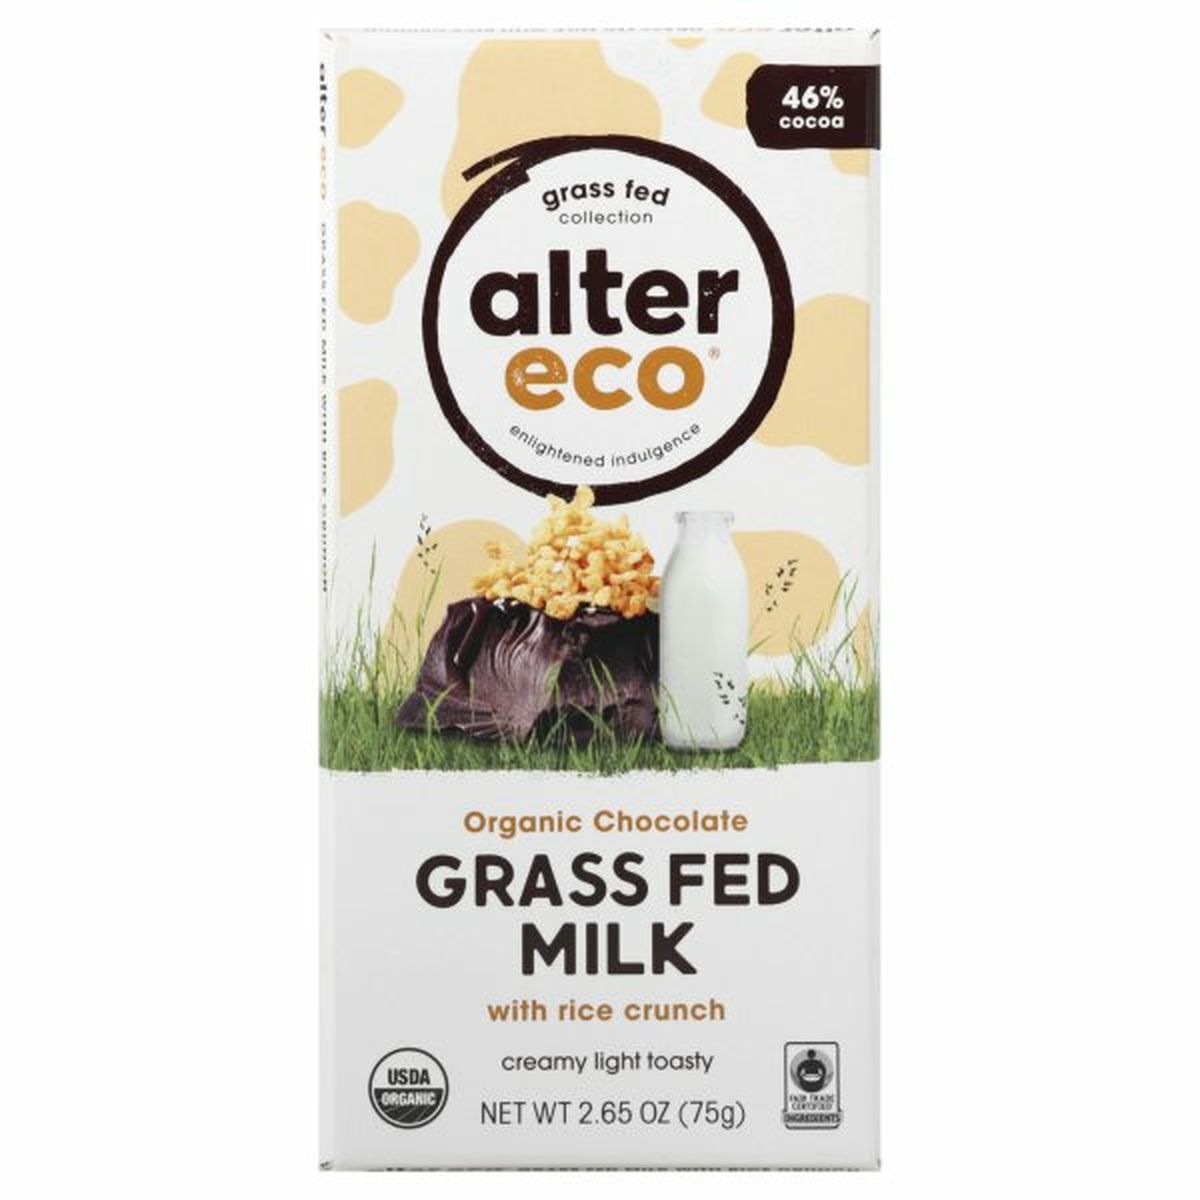 Calories in Alter Eco Grass Fed Collection Chocolate Bar, Organic, Milk with Rice Crunch